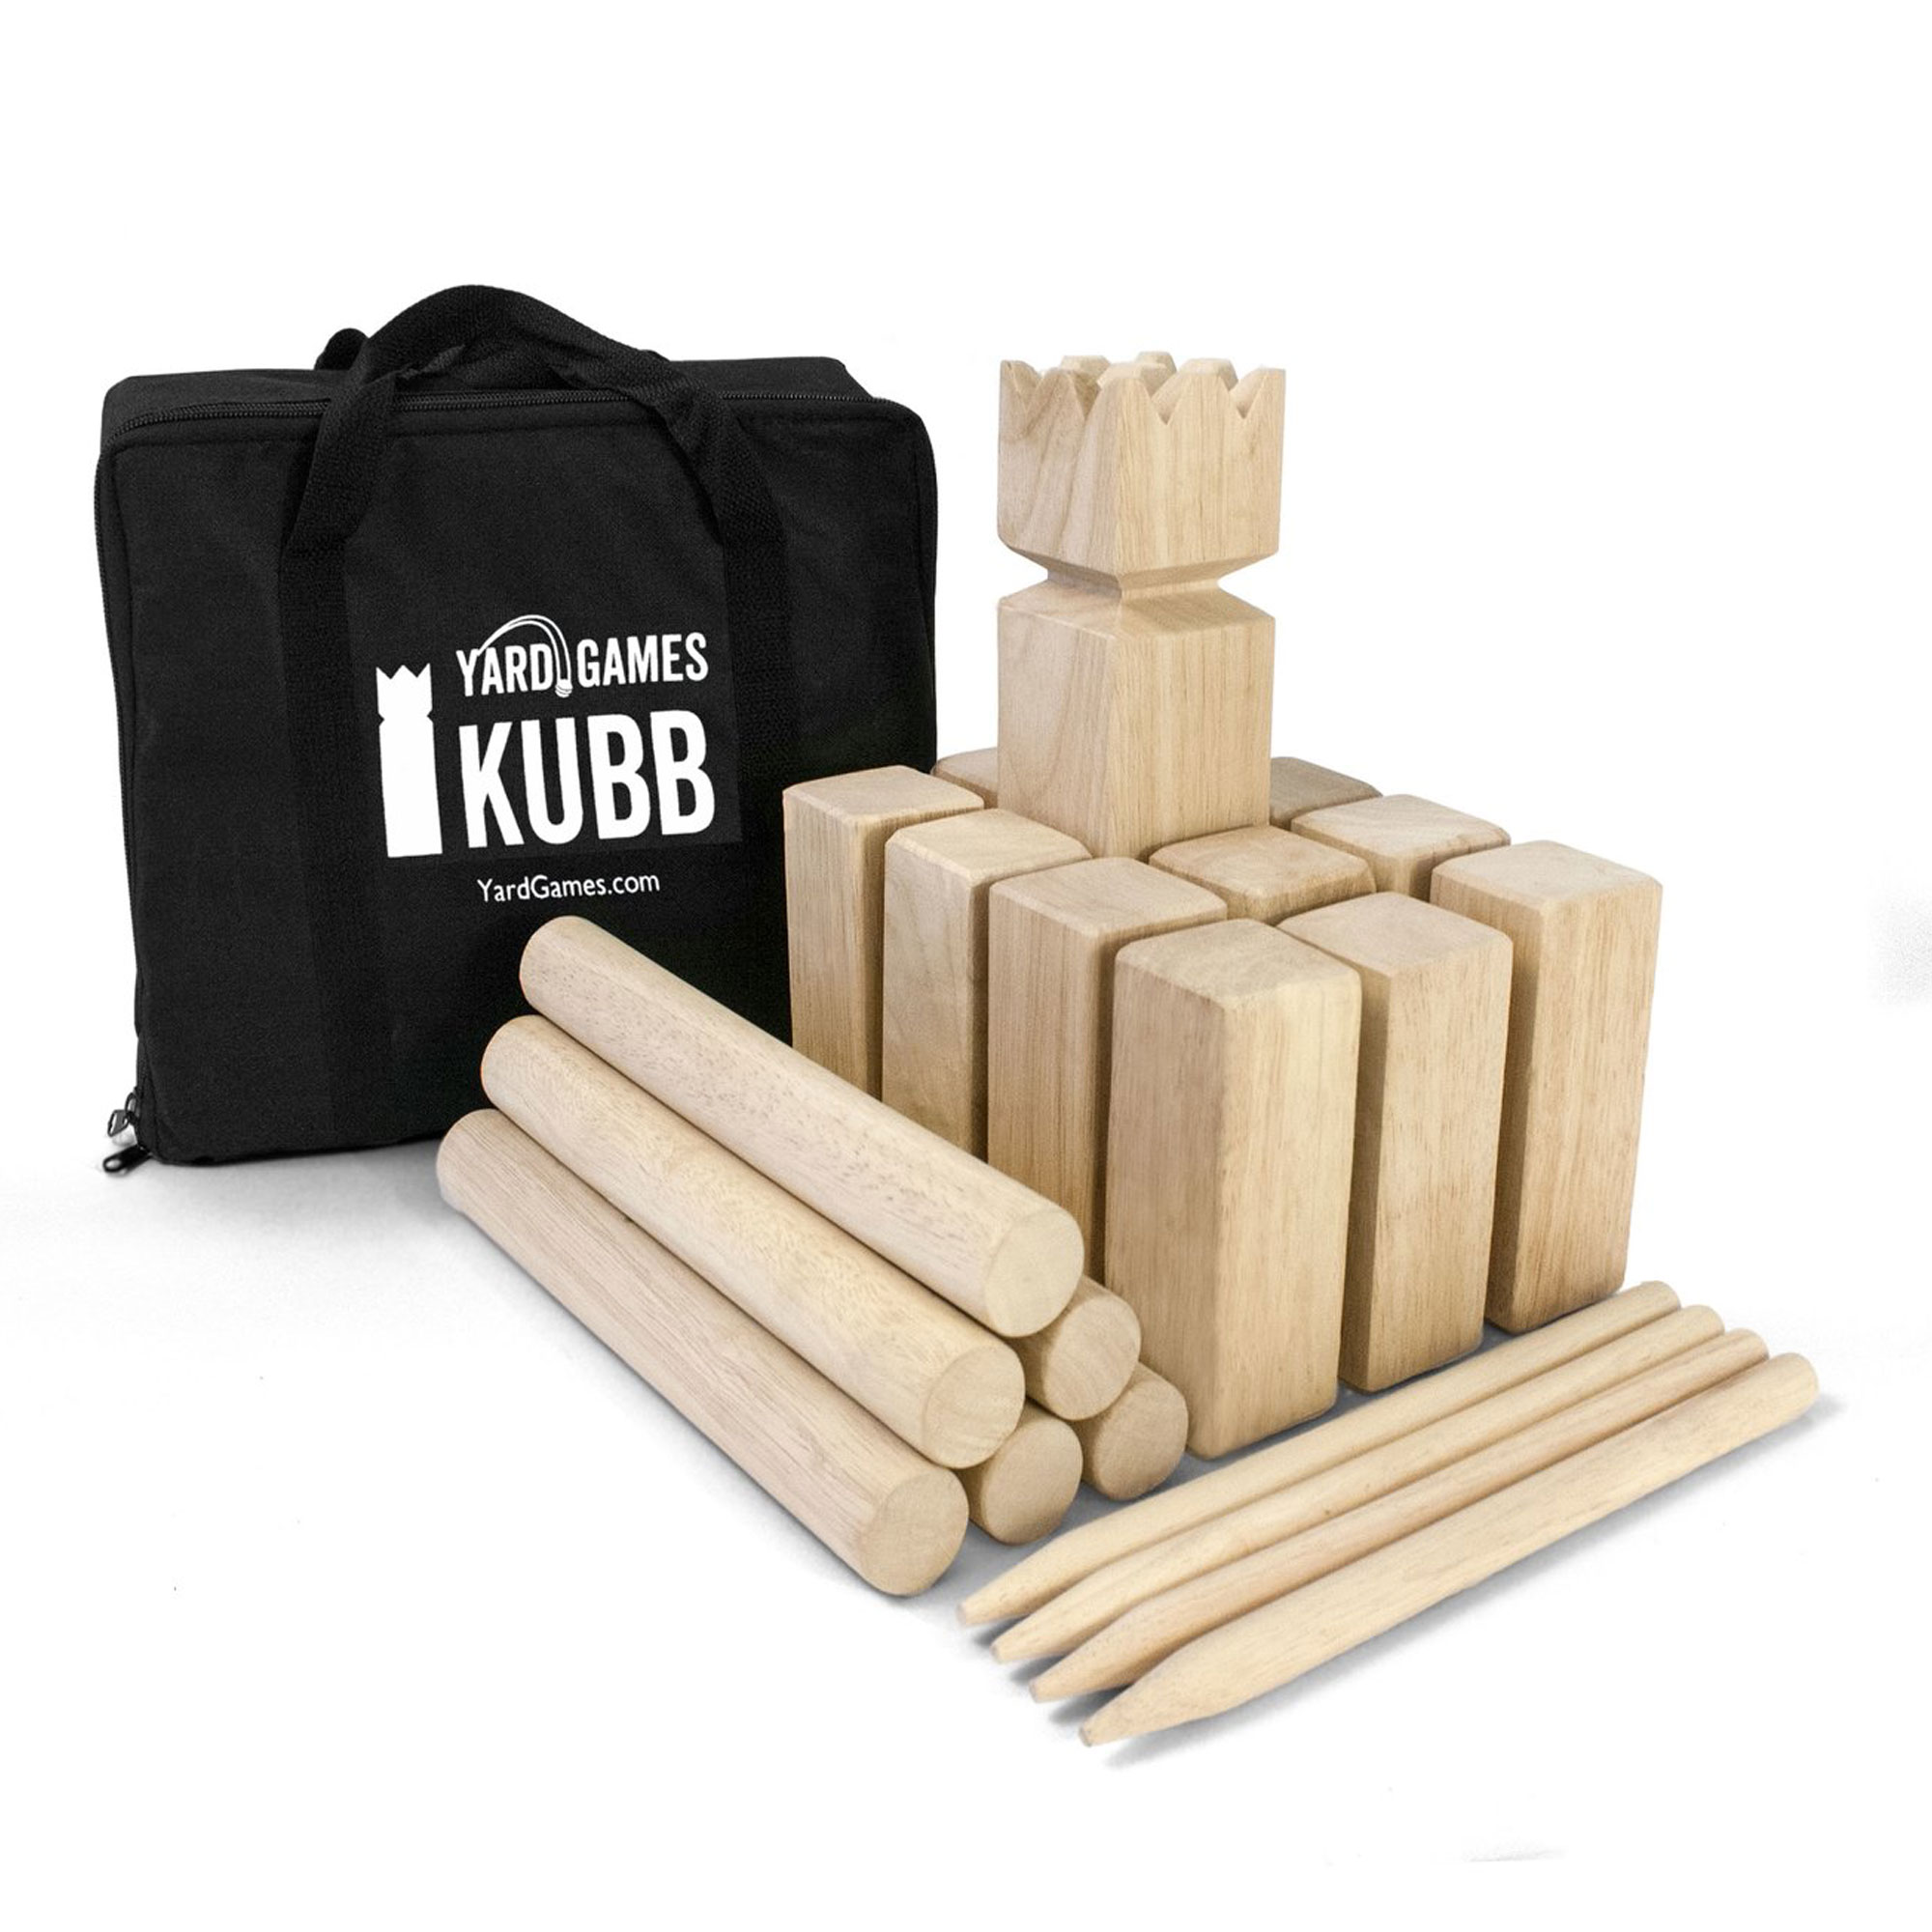 YardGames Kubb Premium Wooden Outdoor Backyard Game Set with Carrying Bag - image 1 of 11